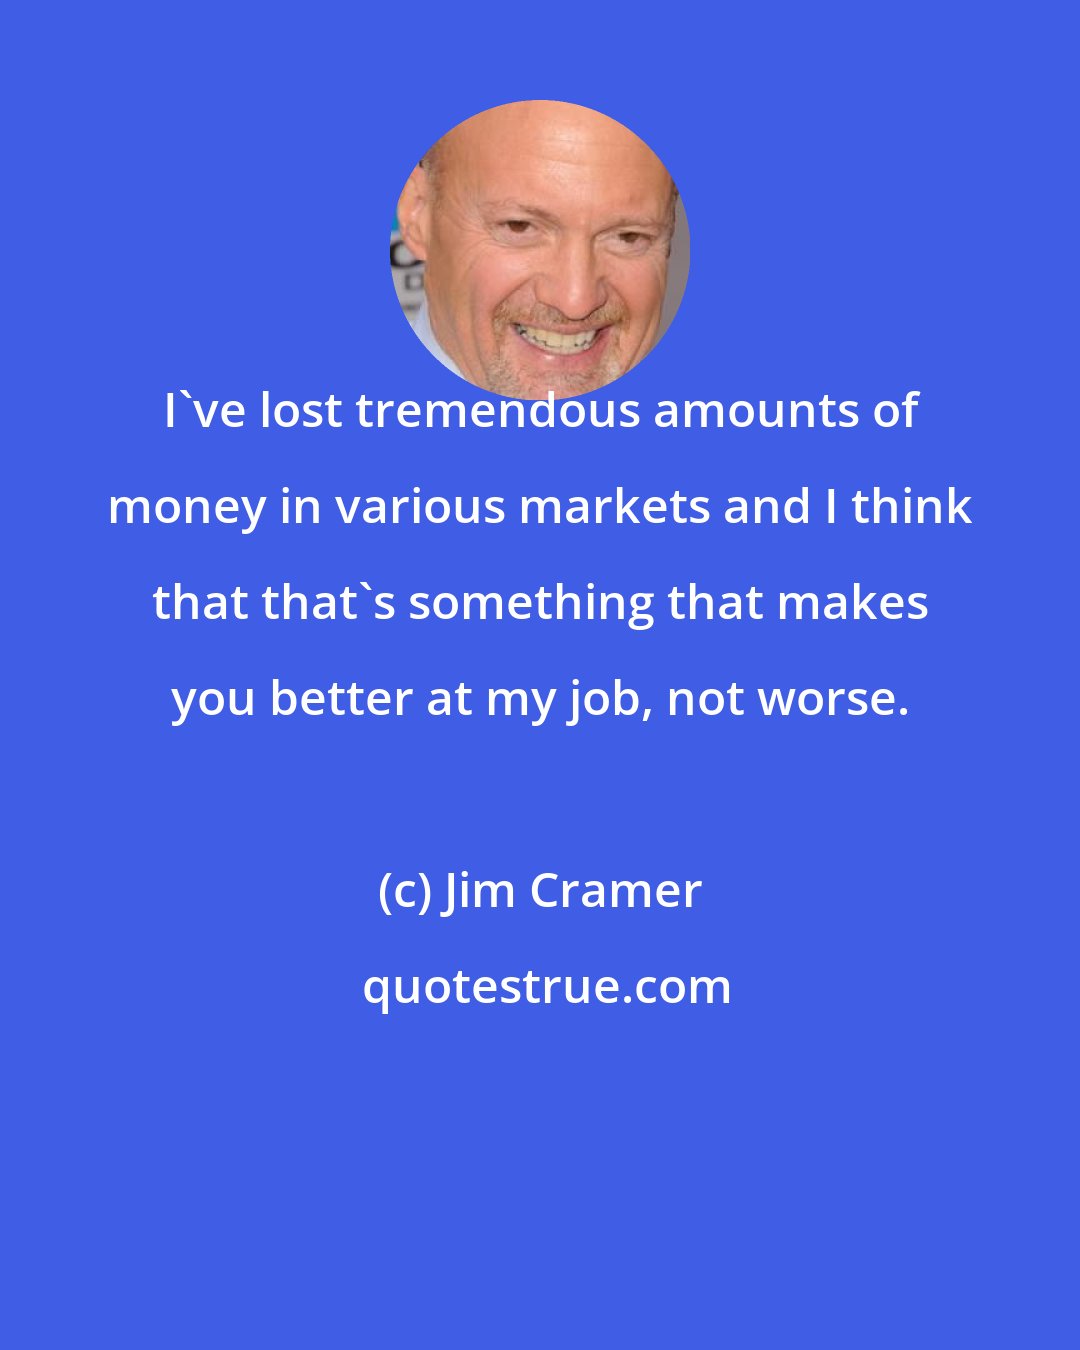 Jim Cramer: I've lost tremendous amounts of money in various markets and I think that that's something that makes you better at my job, not worse.